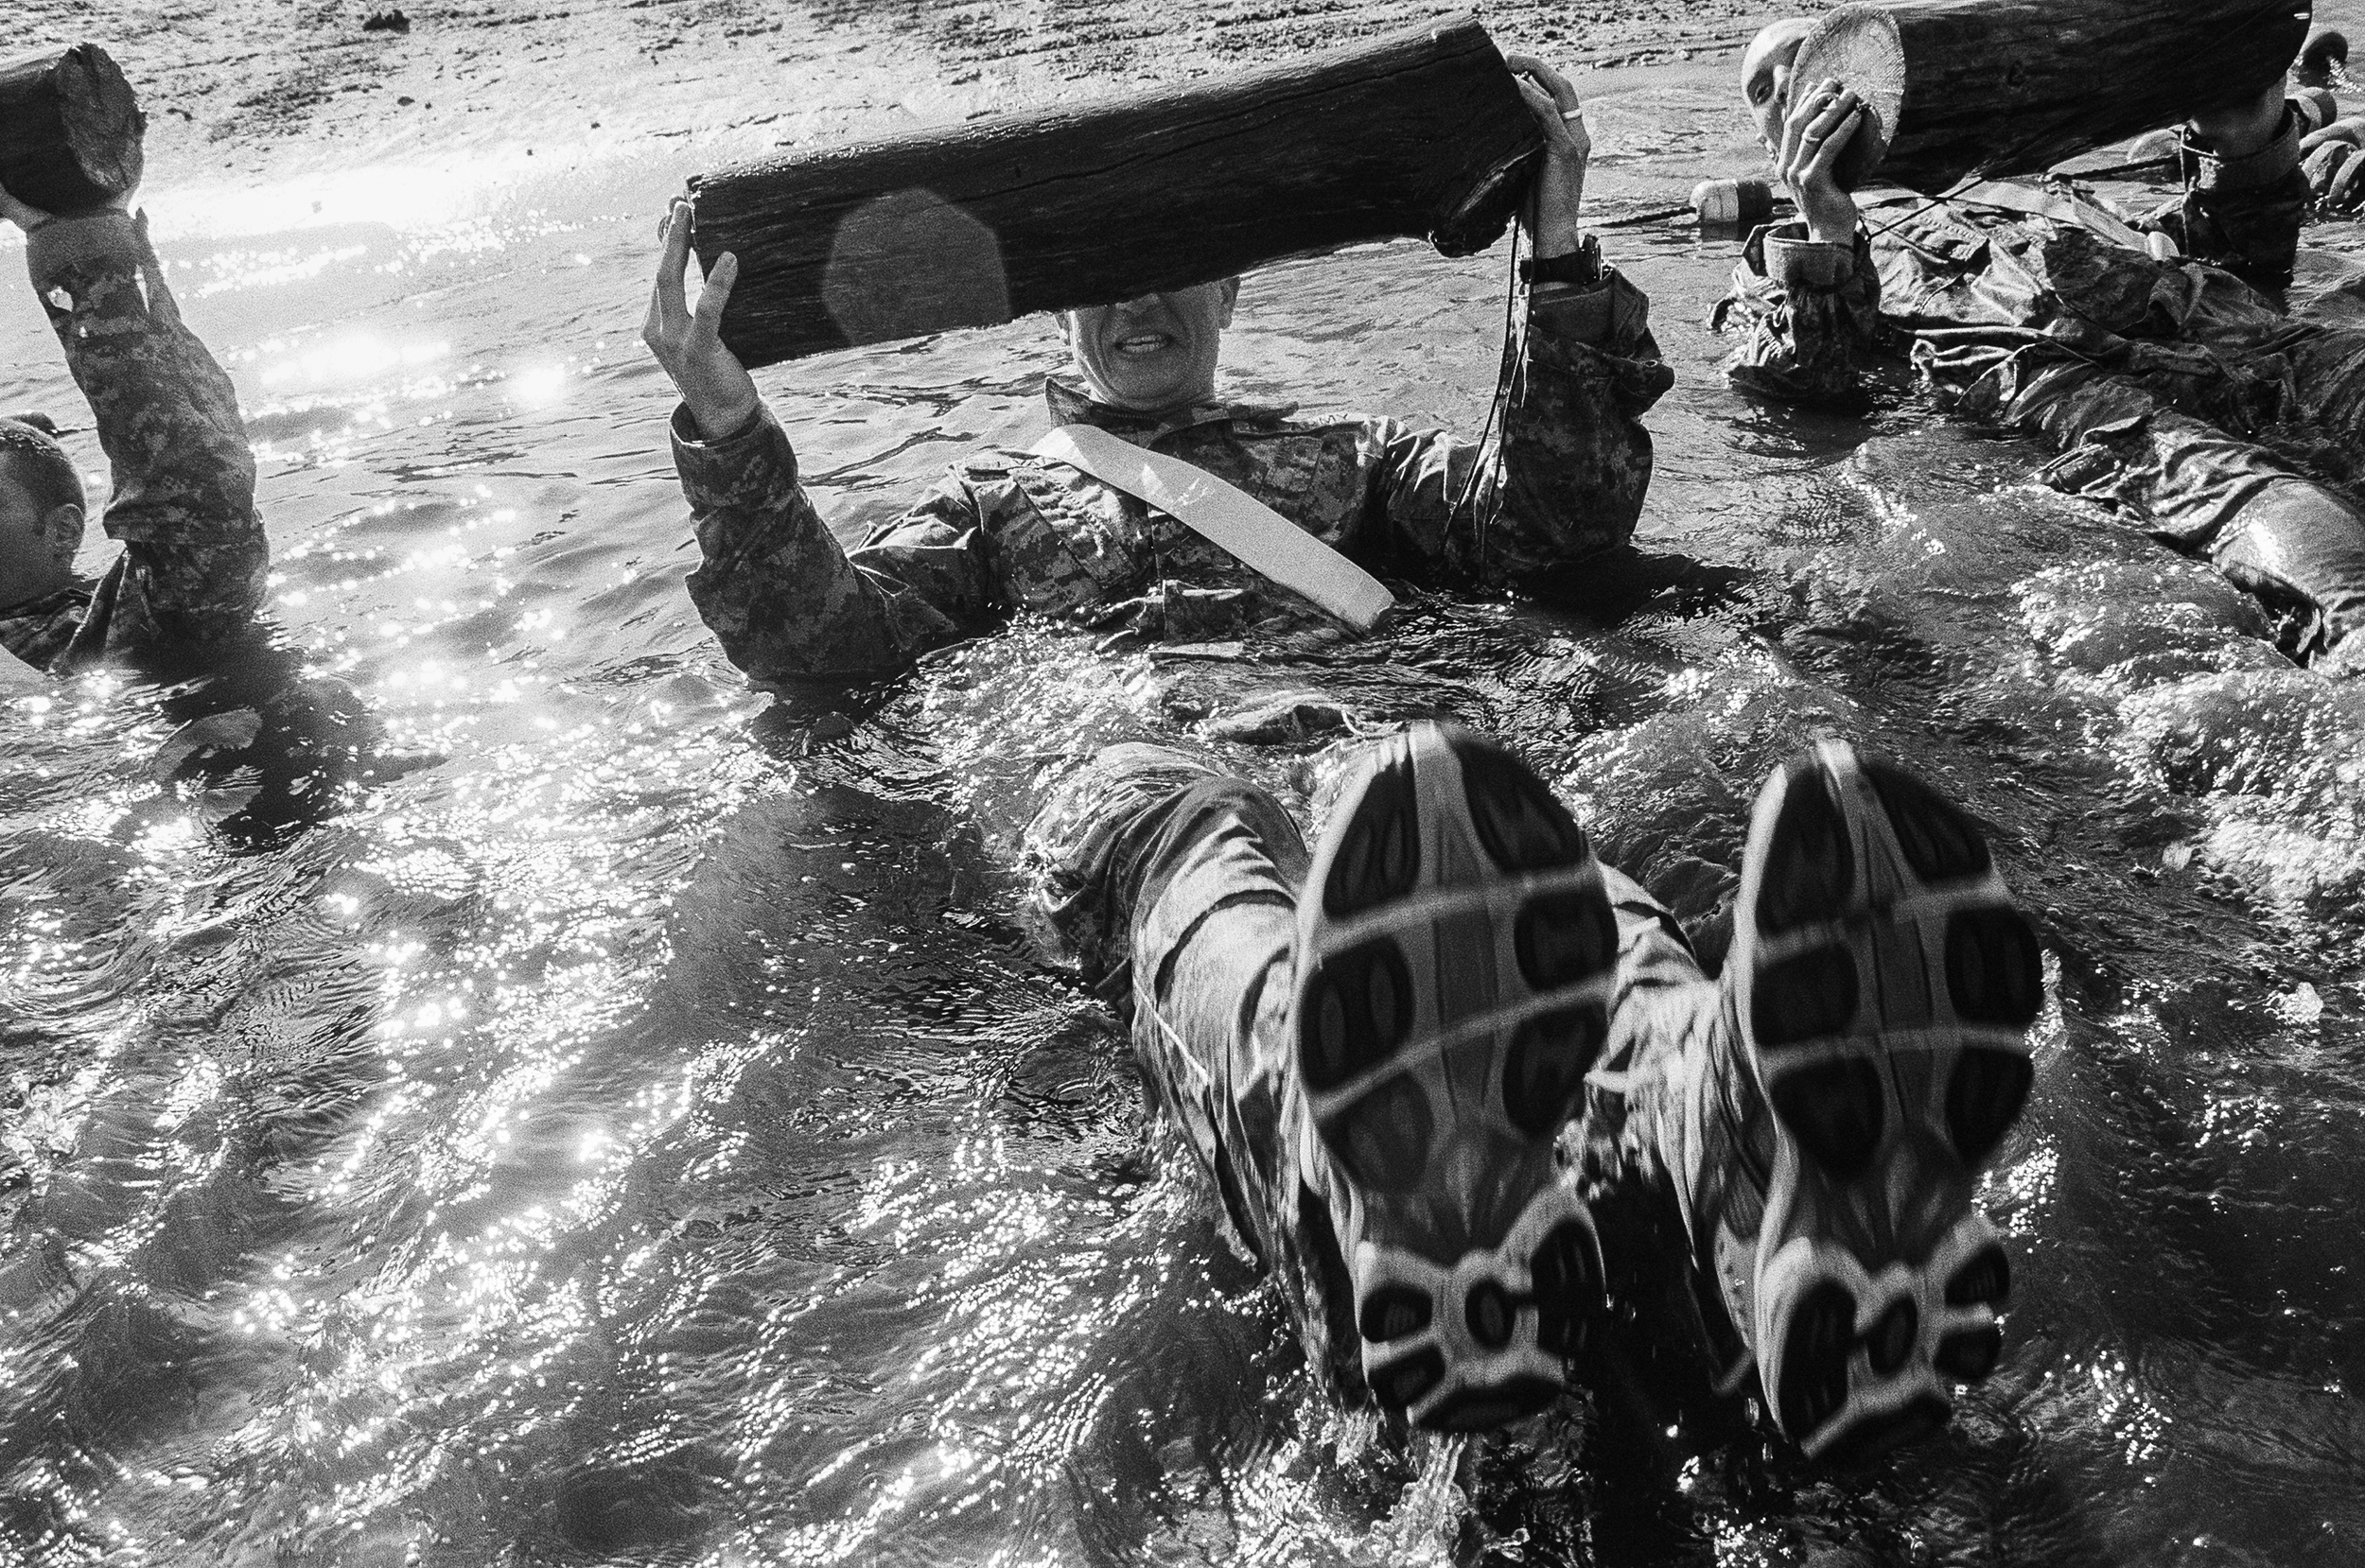  LT John Cote swims with a log during a training drill at Fort Drum, New York, 2010. 